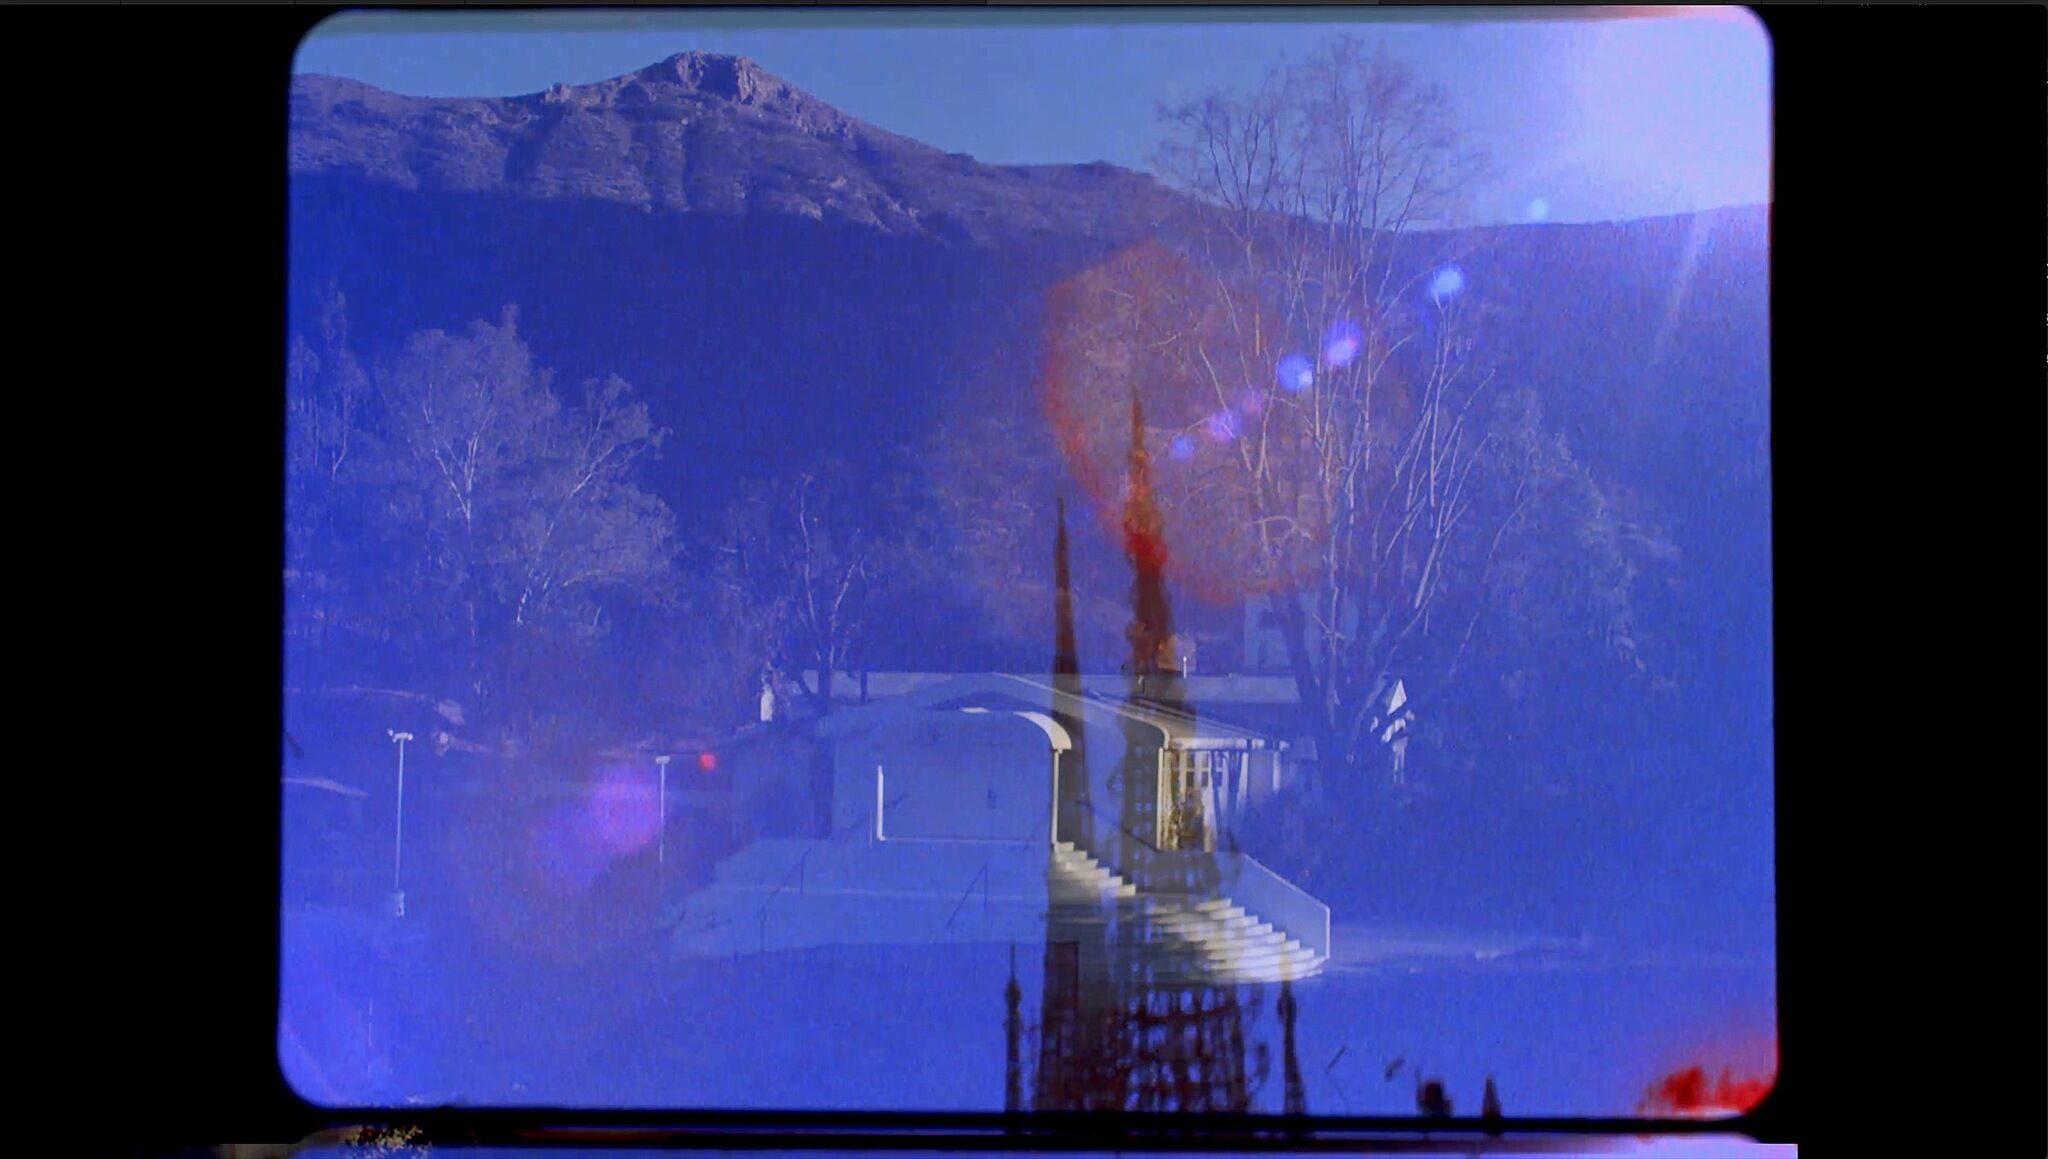 A film still with overlapping images of a spire and mountains.